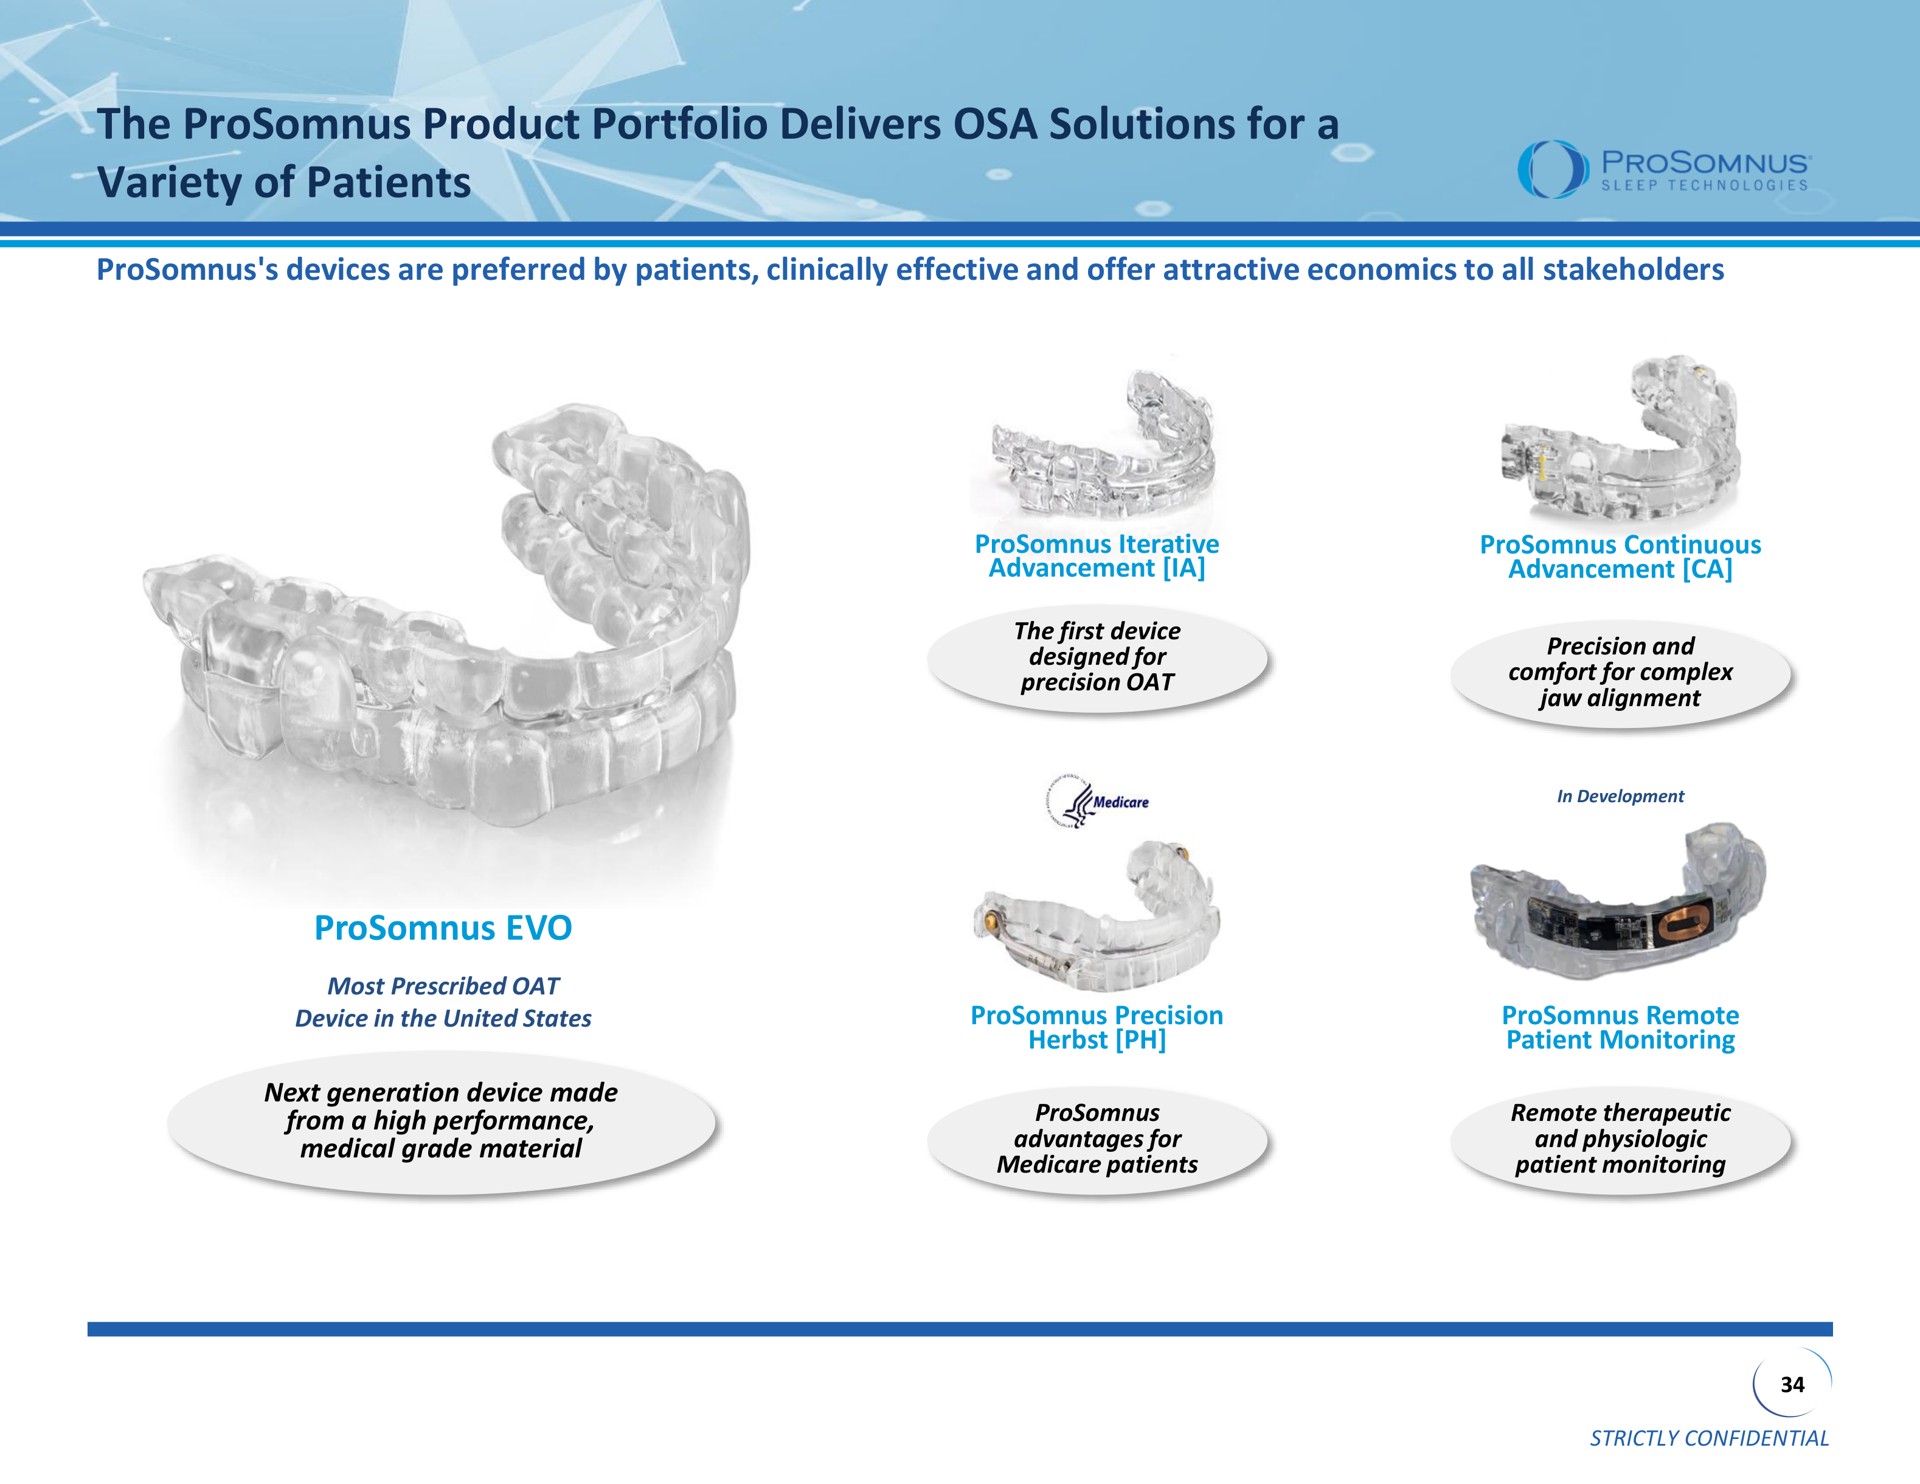 the product portfolio delivers solutions for a variety of patients | ProSomnus